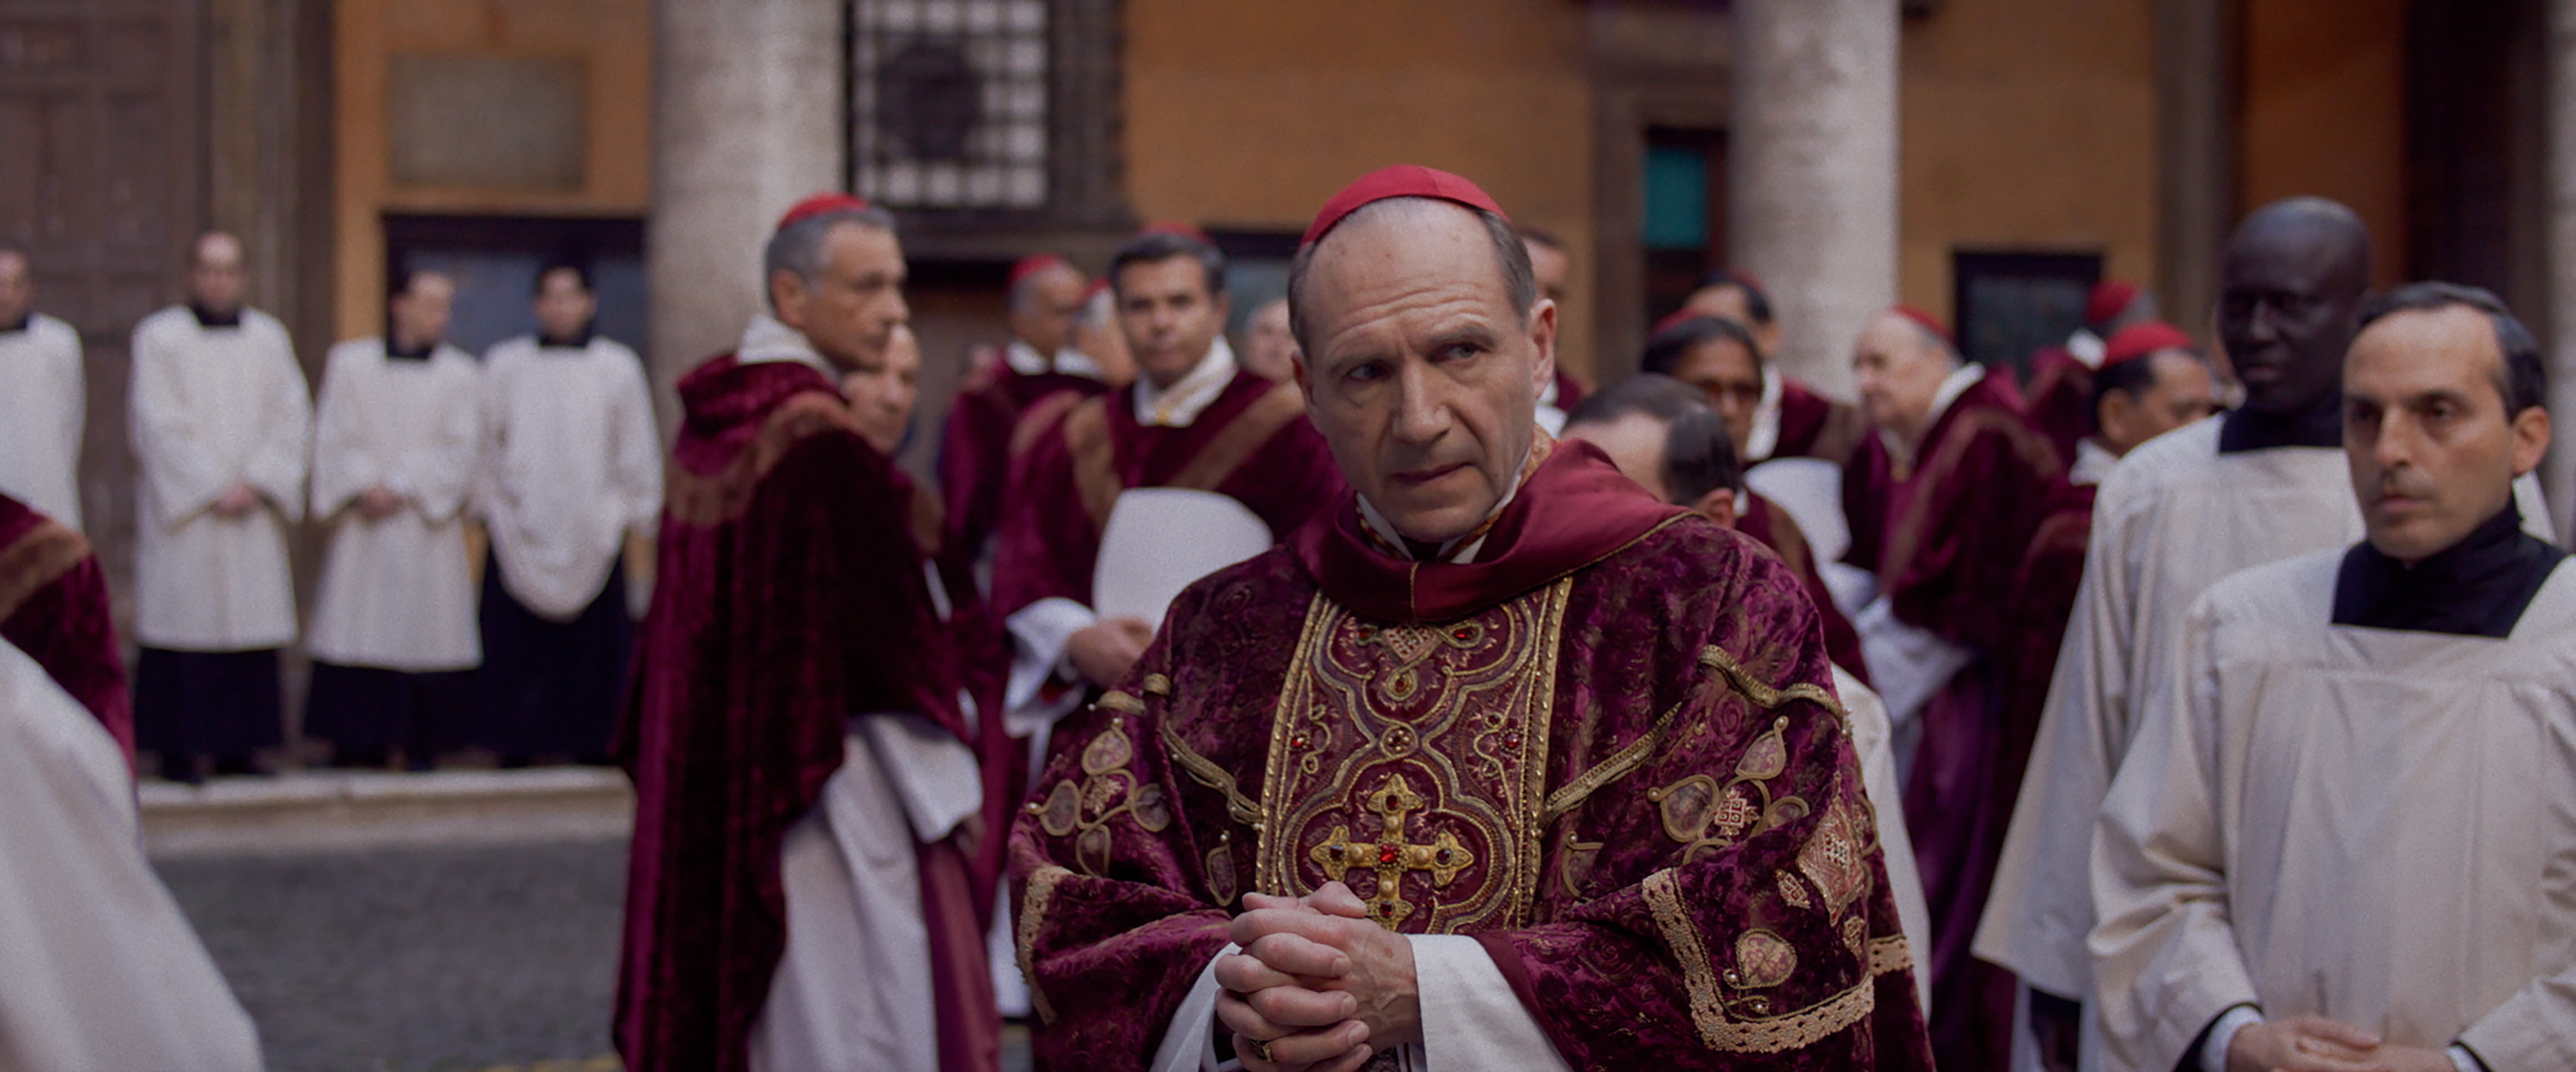 ‘Conclave’ trailer: Ralph Fiennes leads papal thriller from ‘All Quiet’ director Edward Berger [Watch]